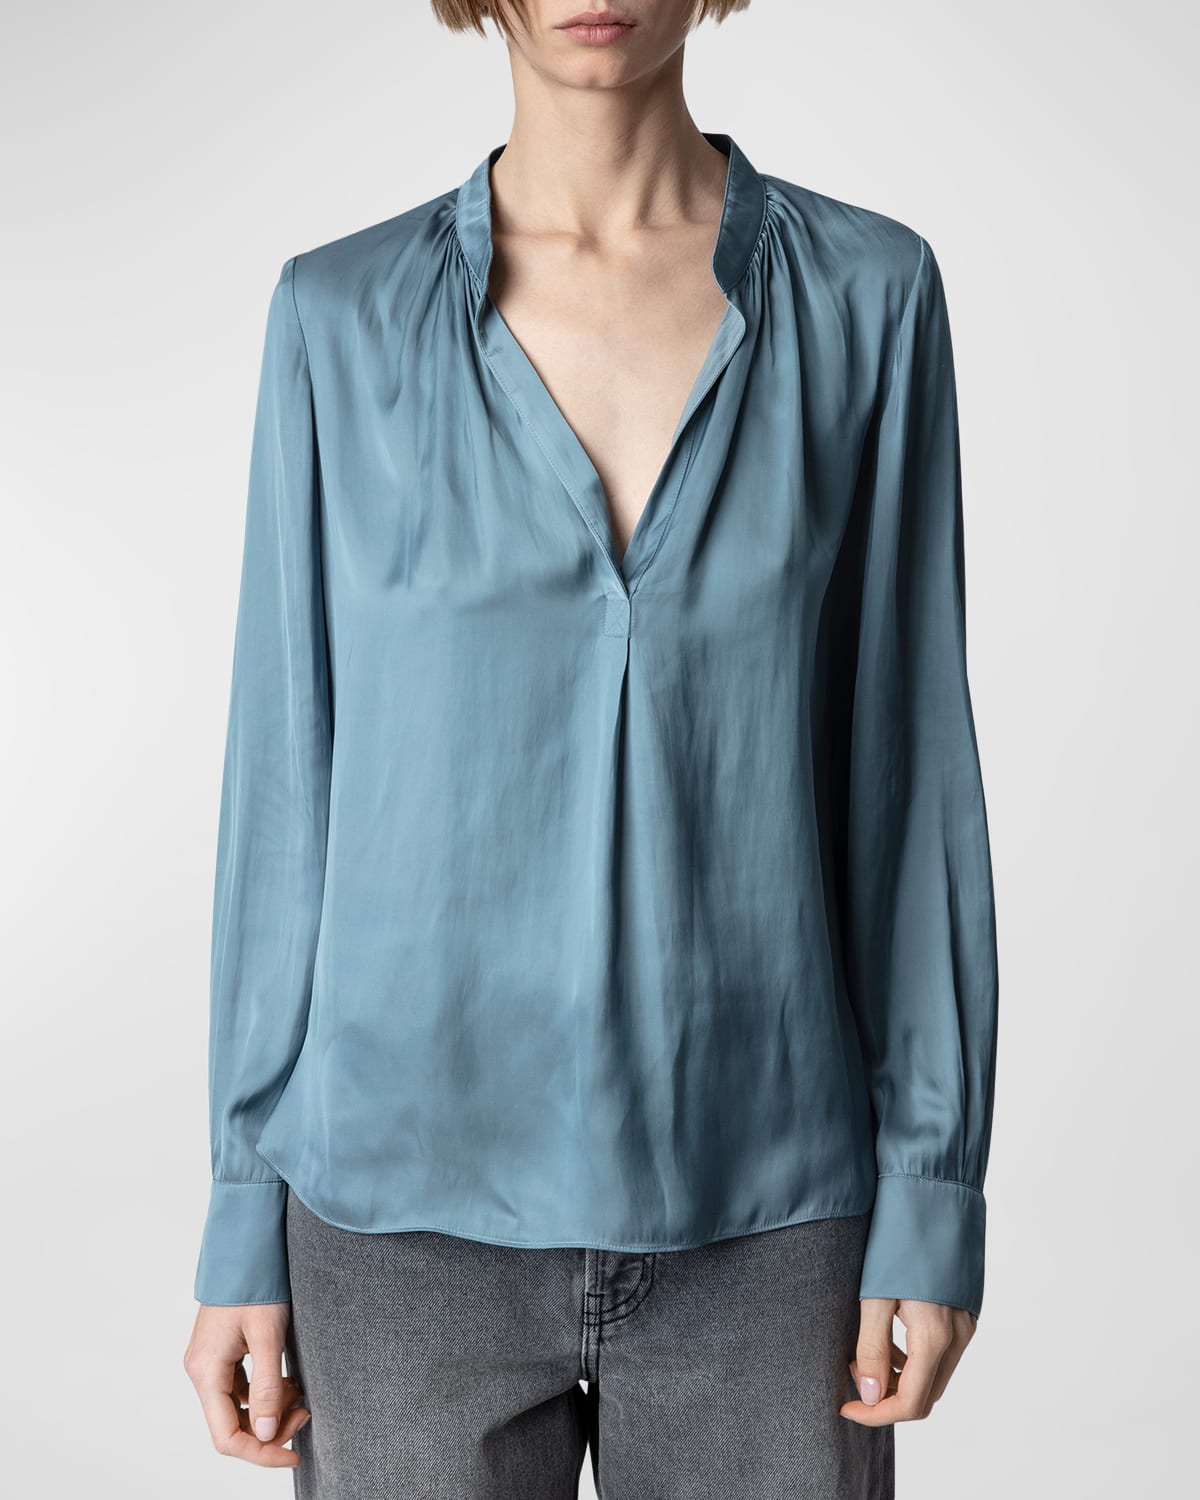 ZADIG & VOLTAIRE TINK SATIN TUNIC TOP